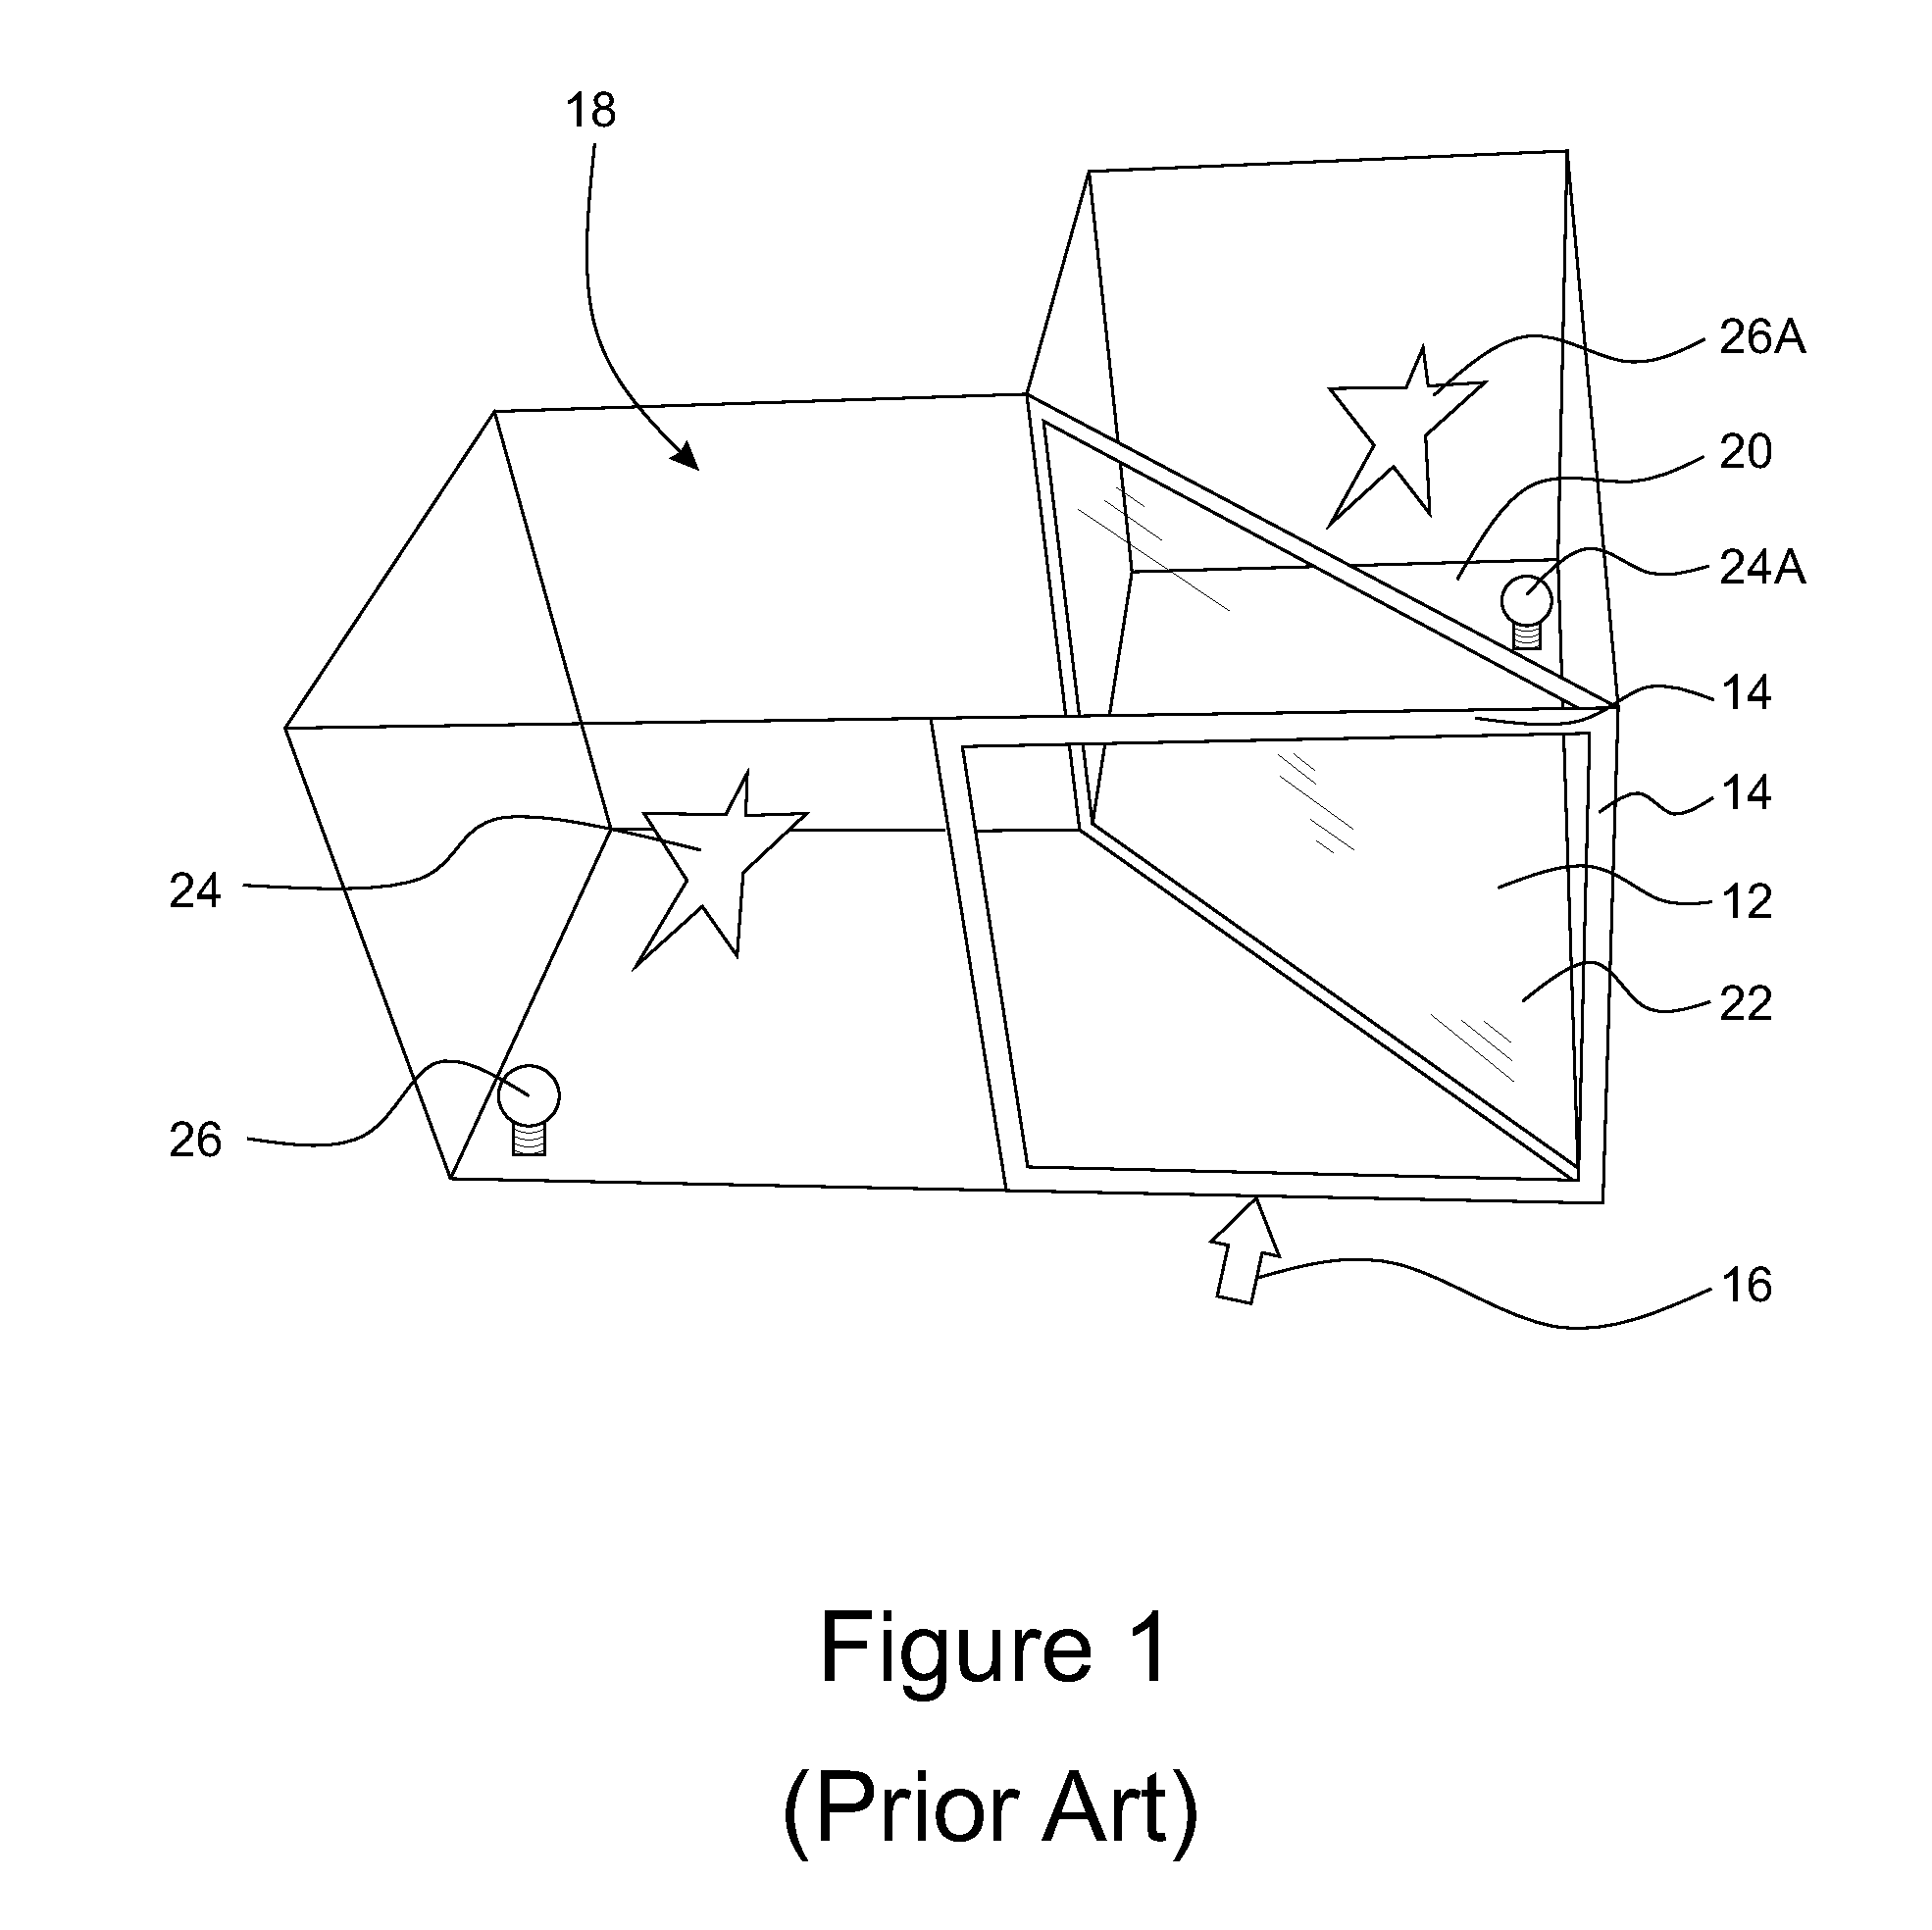 Methods and systems for generating and using simulated 3D images